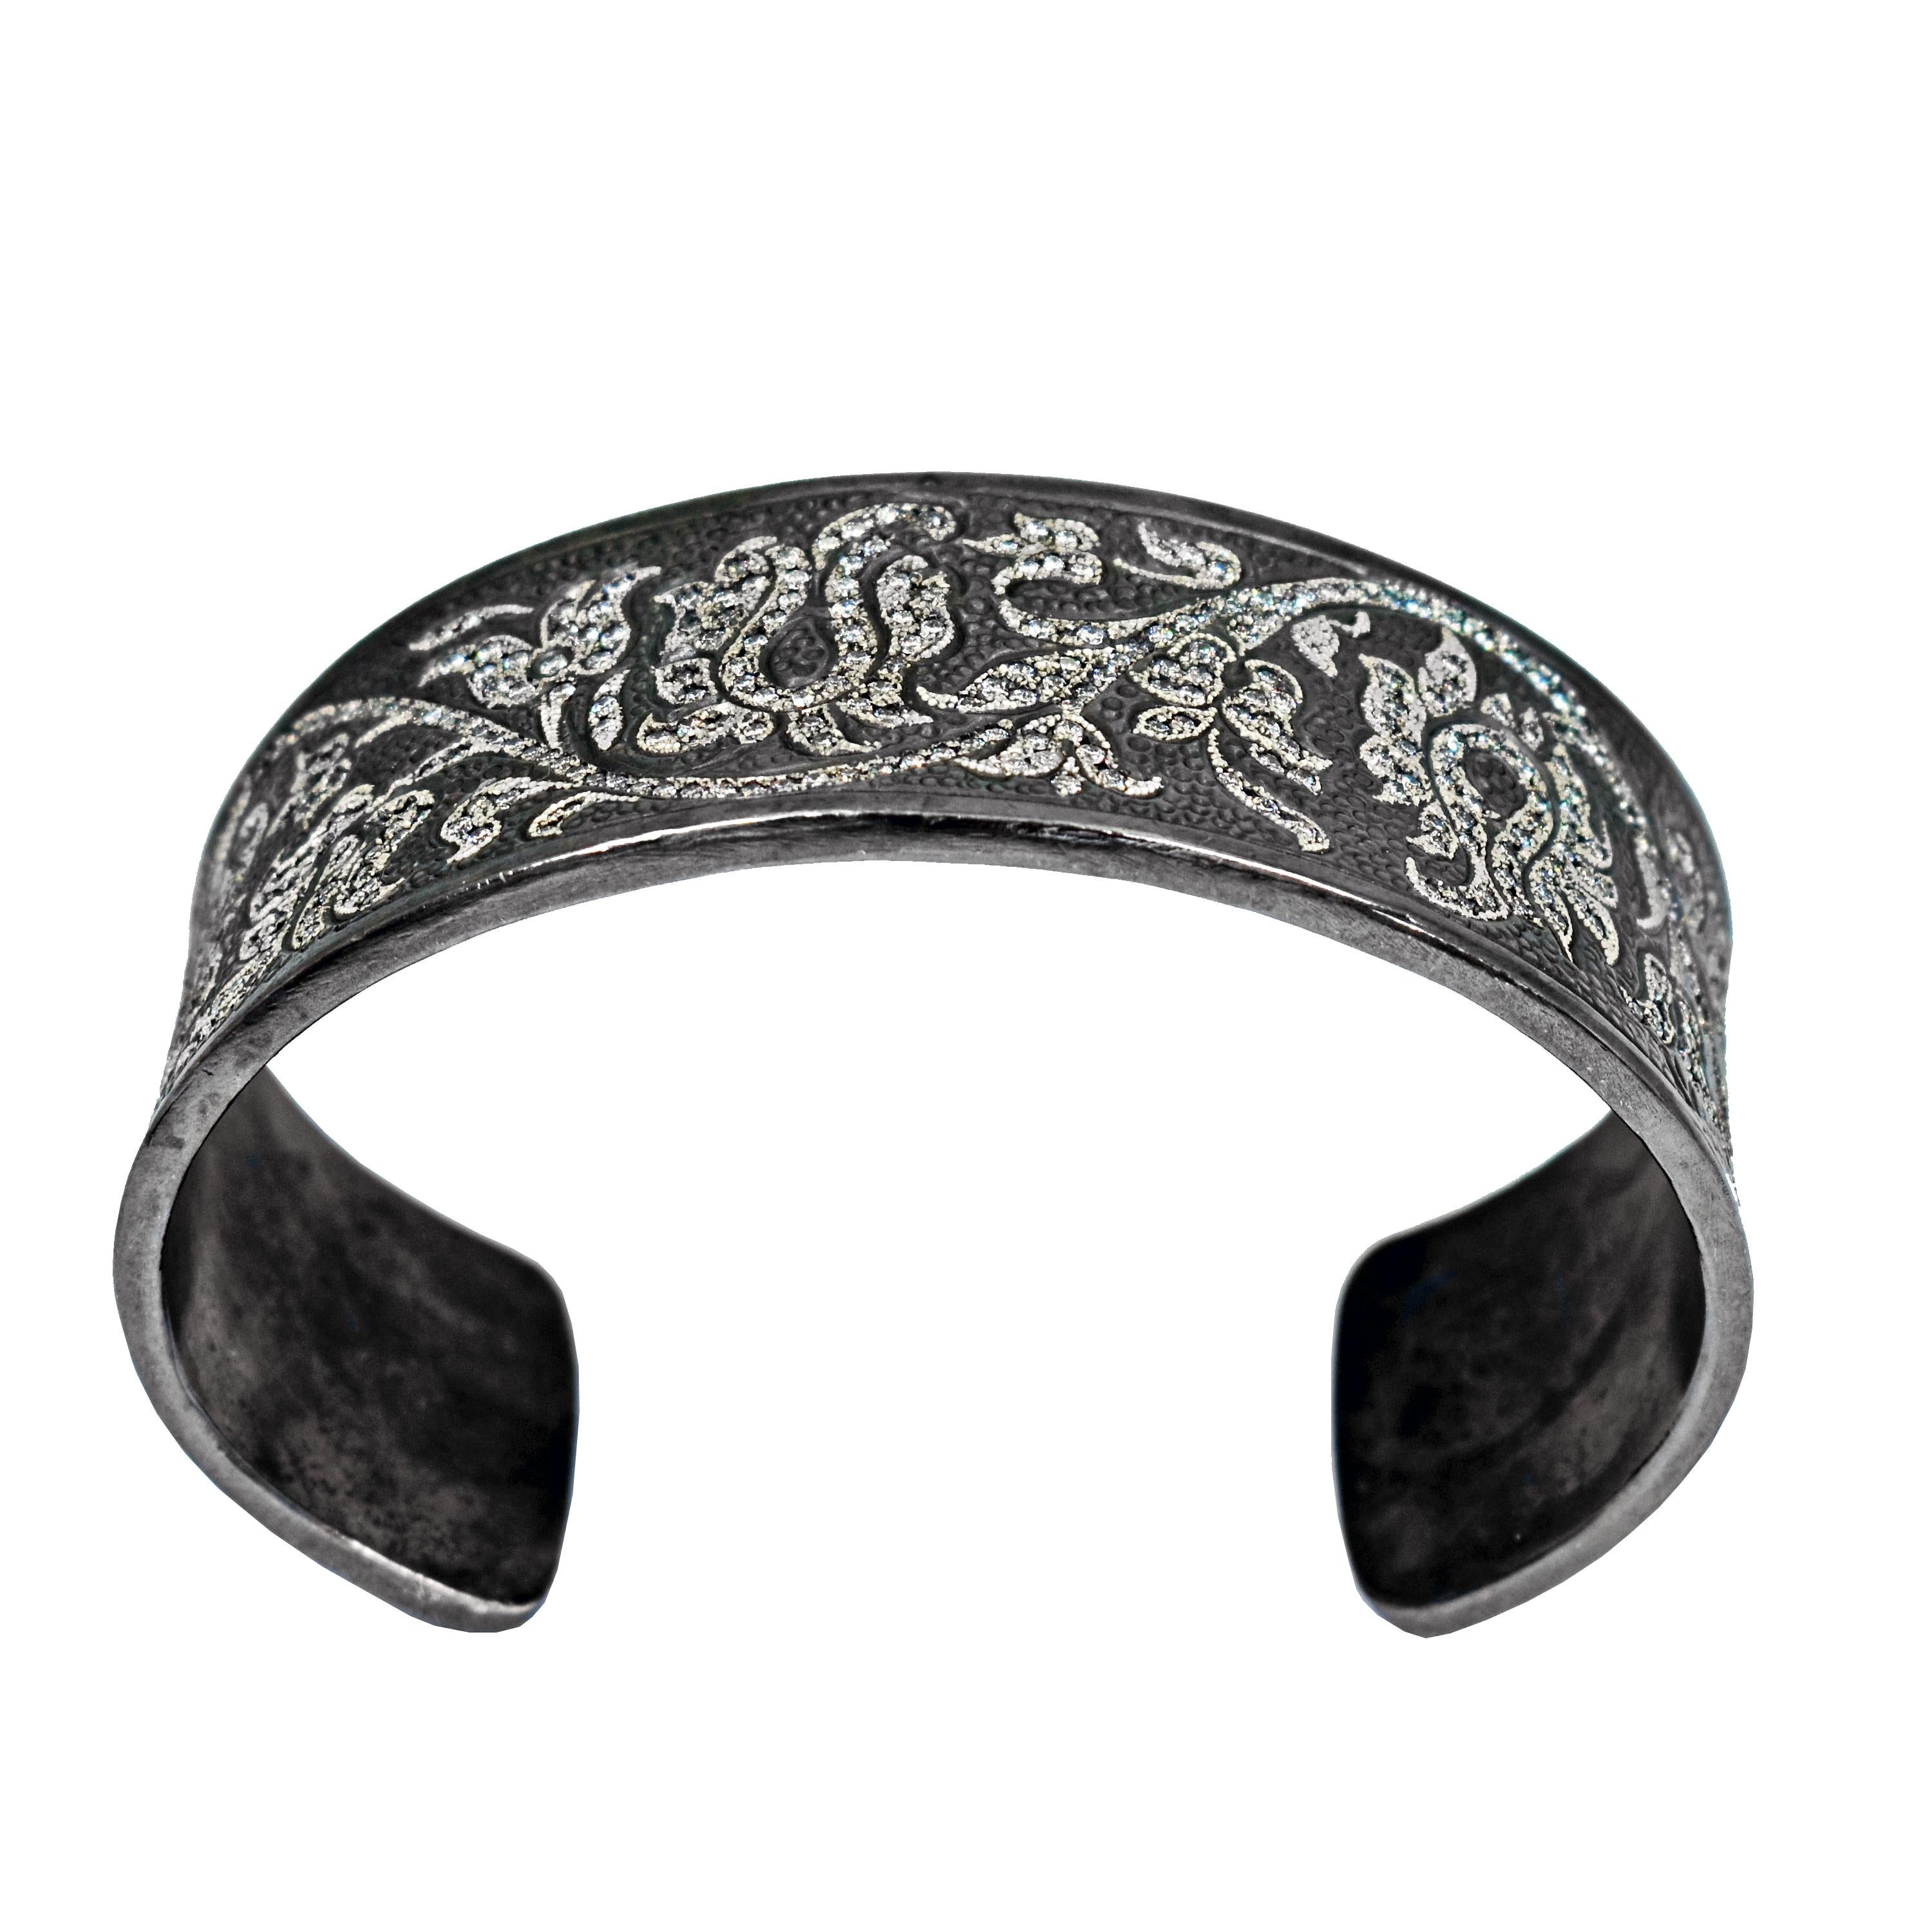 Diamond pavé and engraved / tooled design in an oxidized sterling silver cuff bracelet with over 3 carats of diamonds (3.21 carats, G-H, SI1). Cuff bracelet is 0.94 inch wide. Inside of bracelet is 2.44 inches across and cuff opening is 1.25 inches